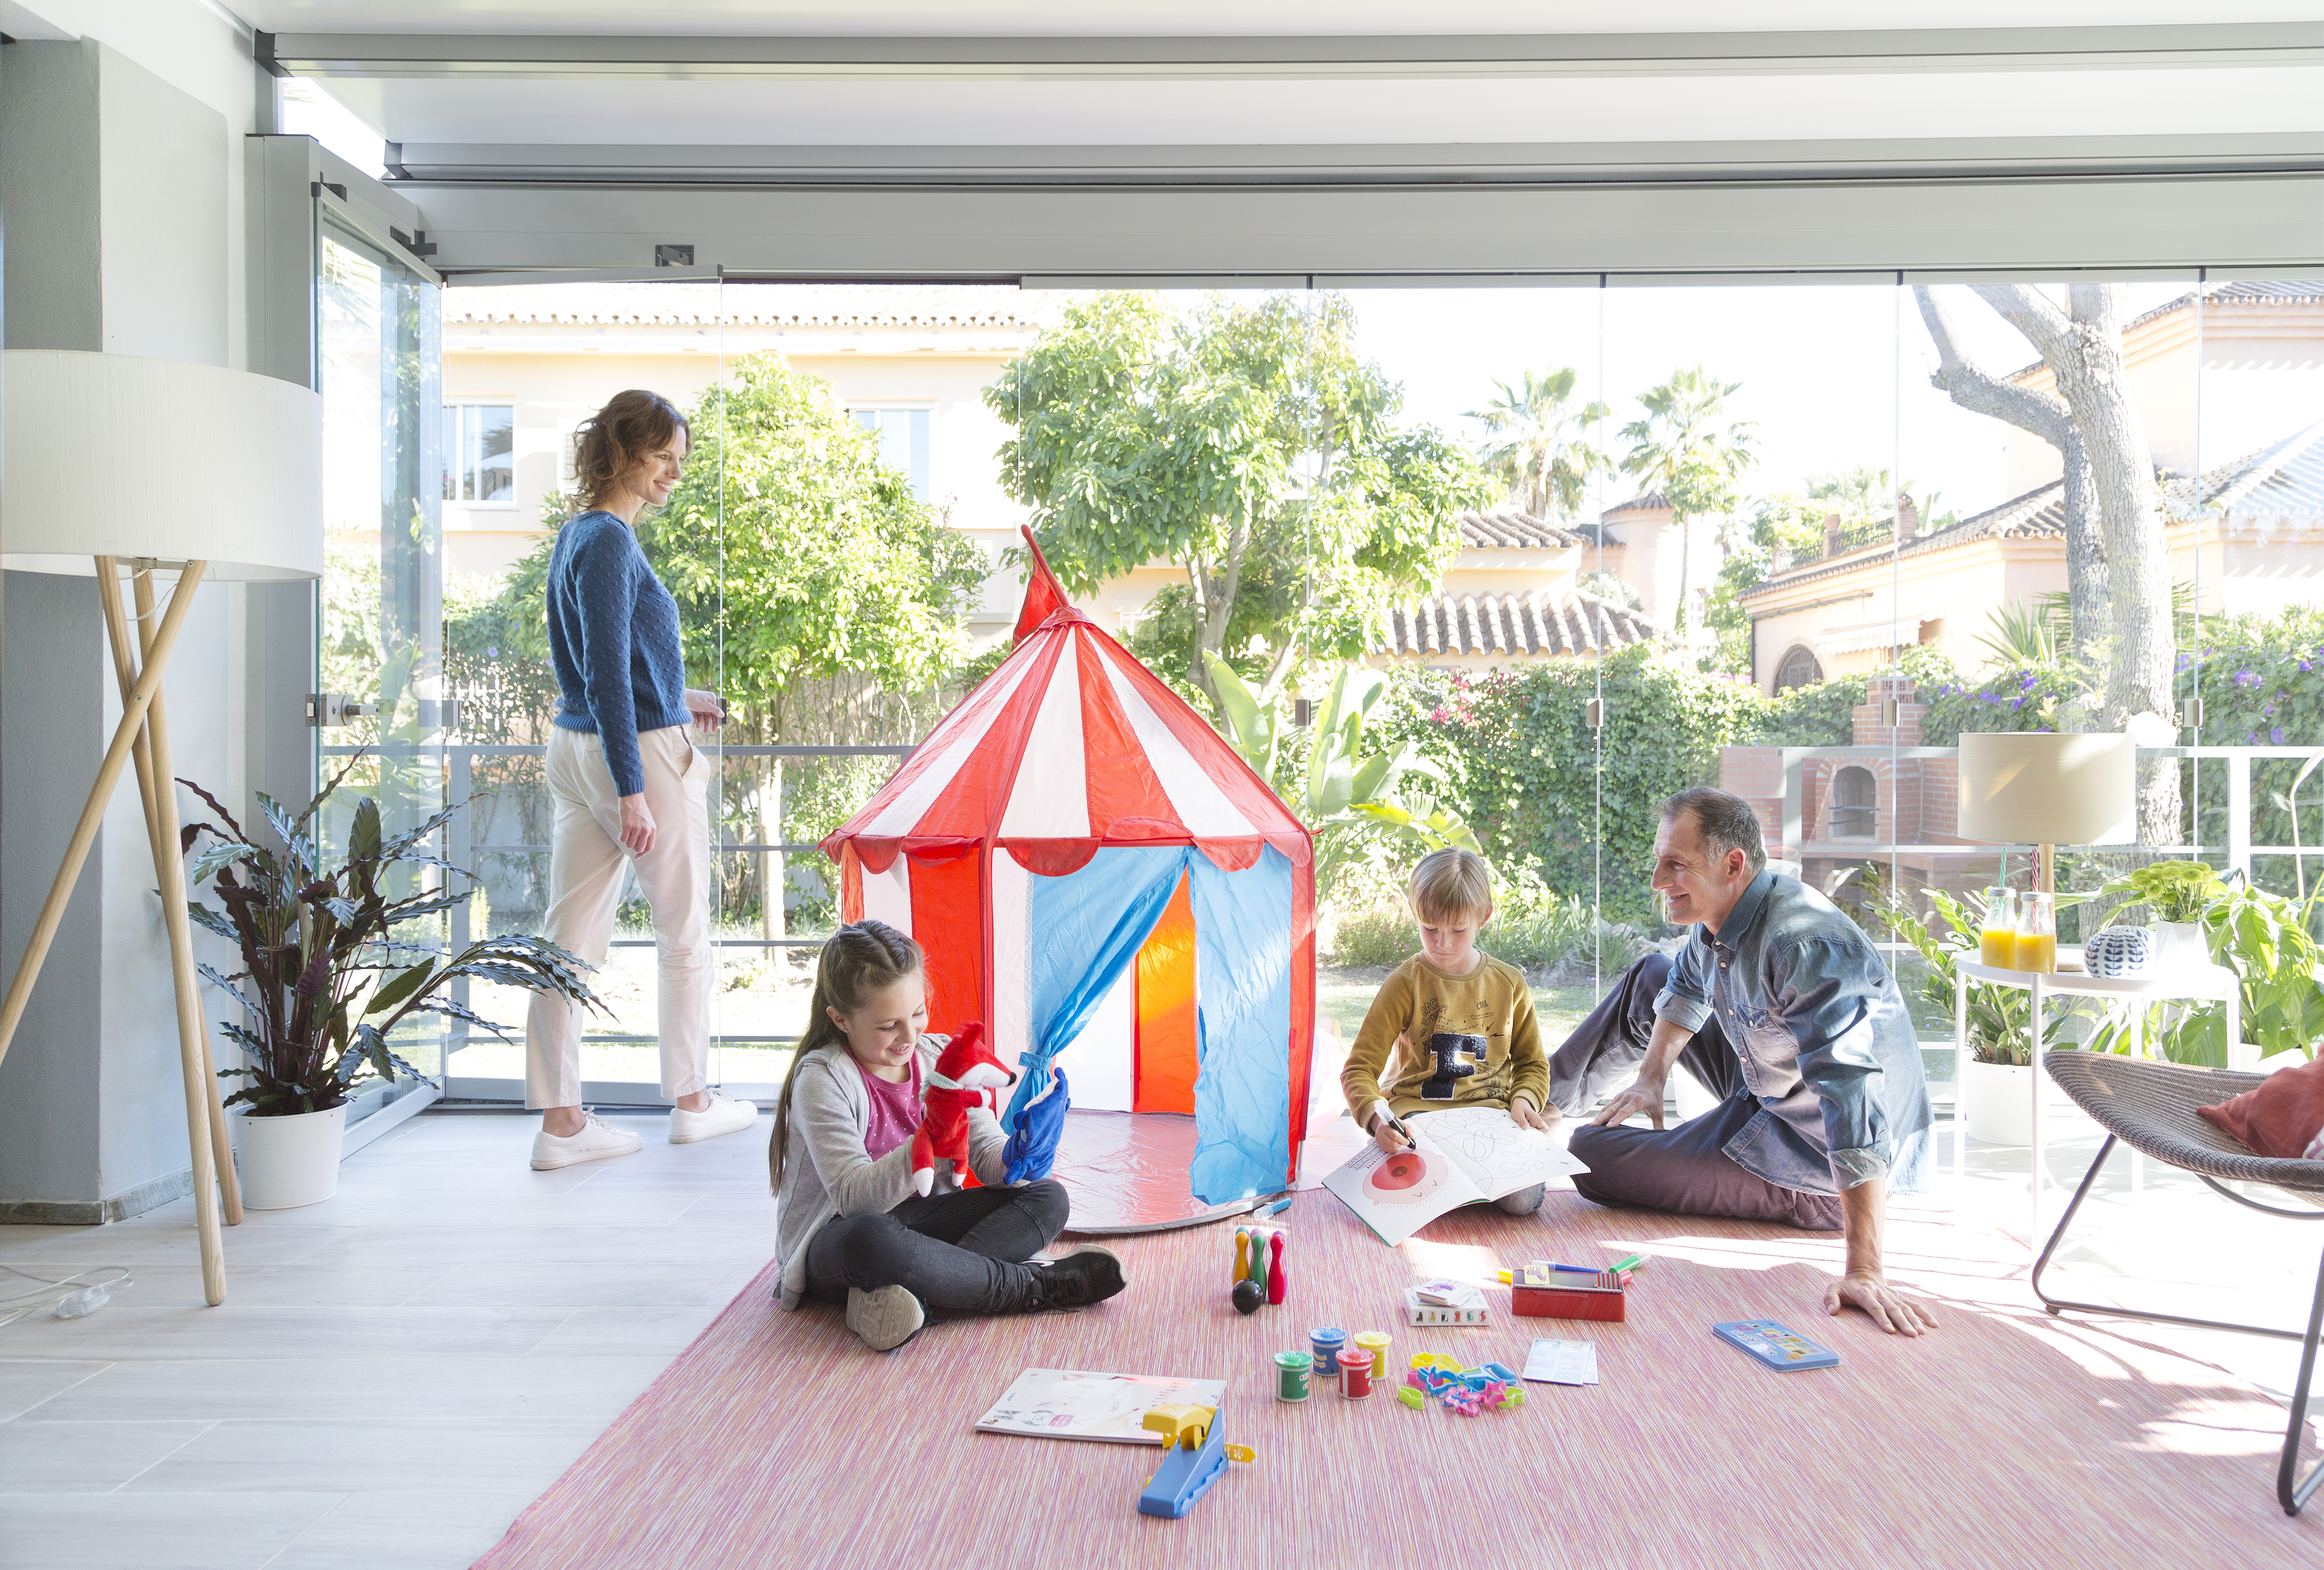 The sunroom is a safe indoor play area for your pets and children: children playing in sunroom